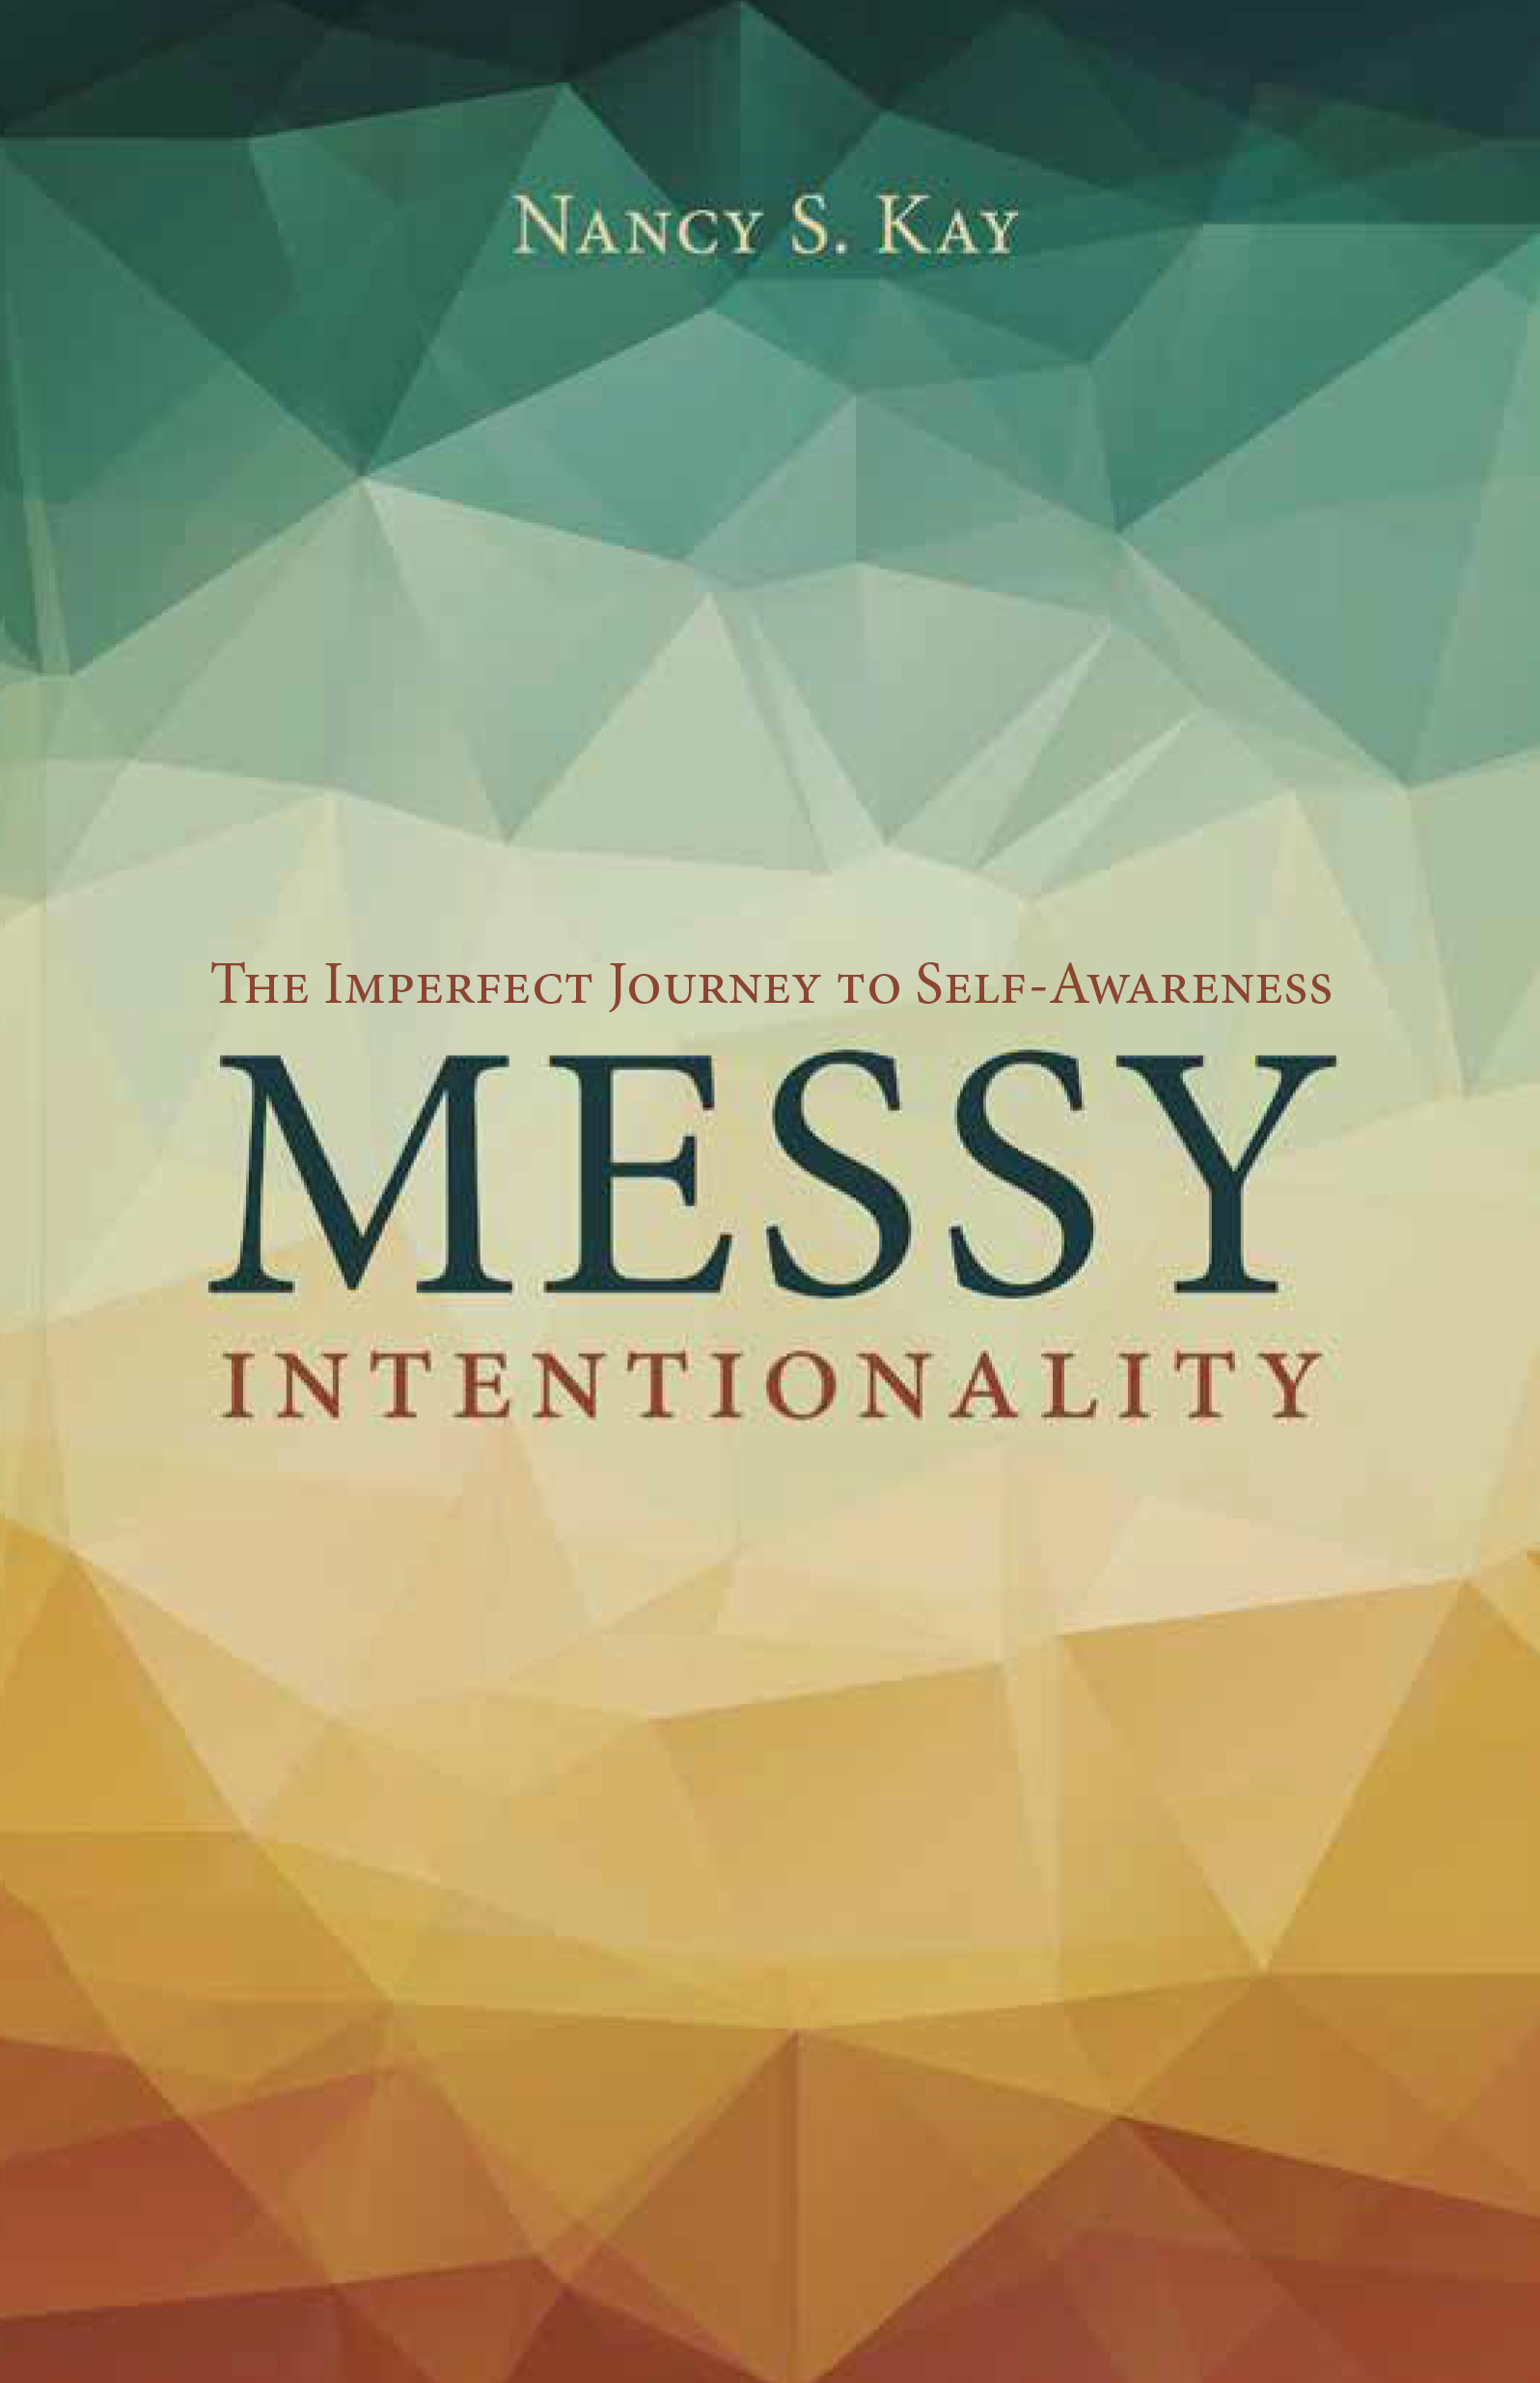 book-cover-messy-intentionality